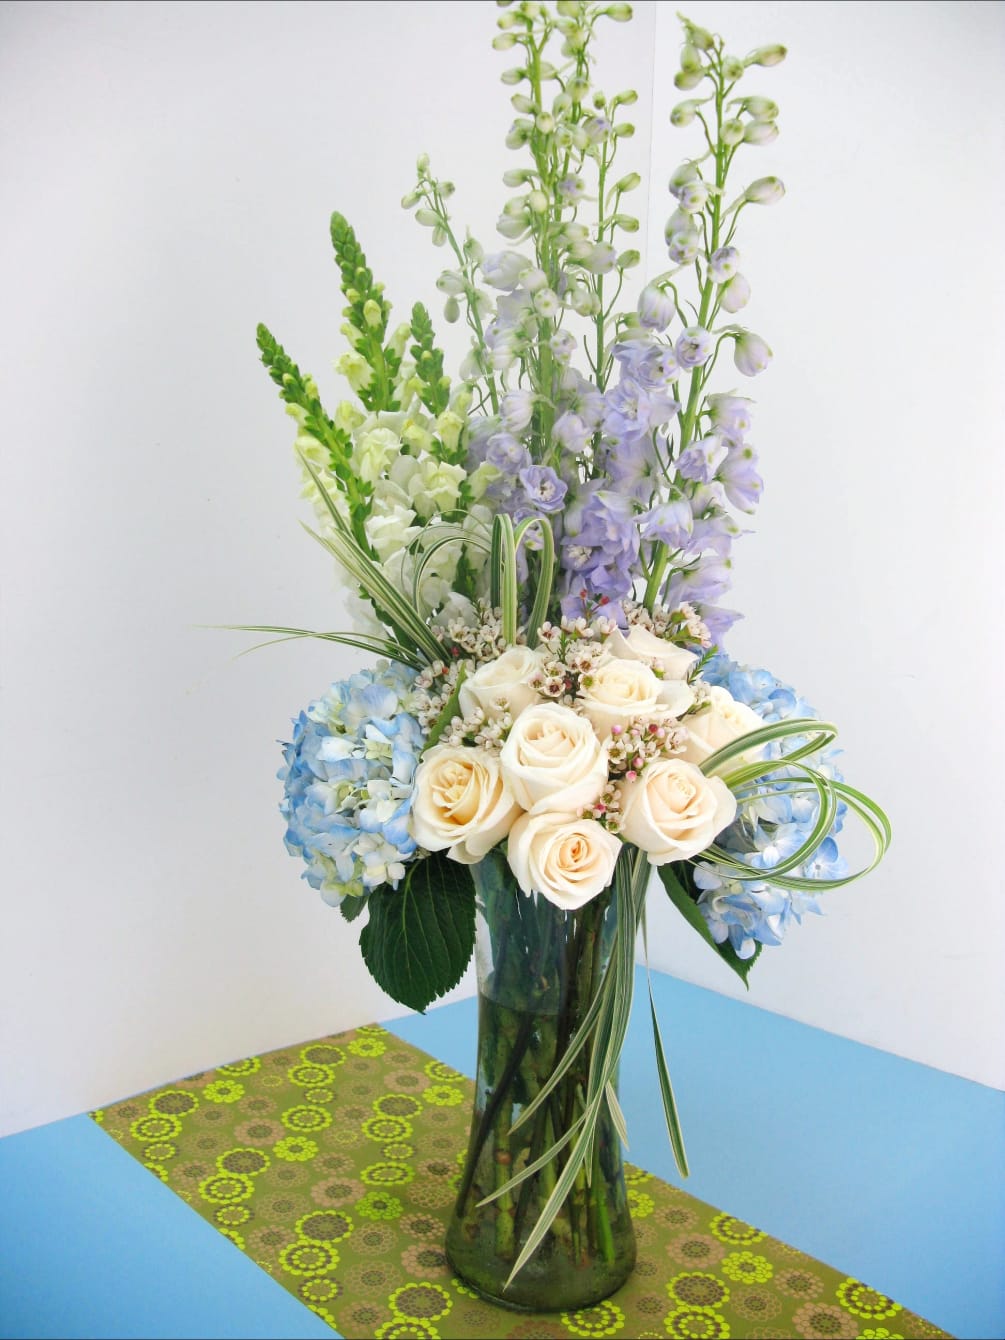 Unique arrangement with white and blue flowers arranged in a clear vase.